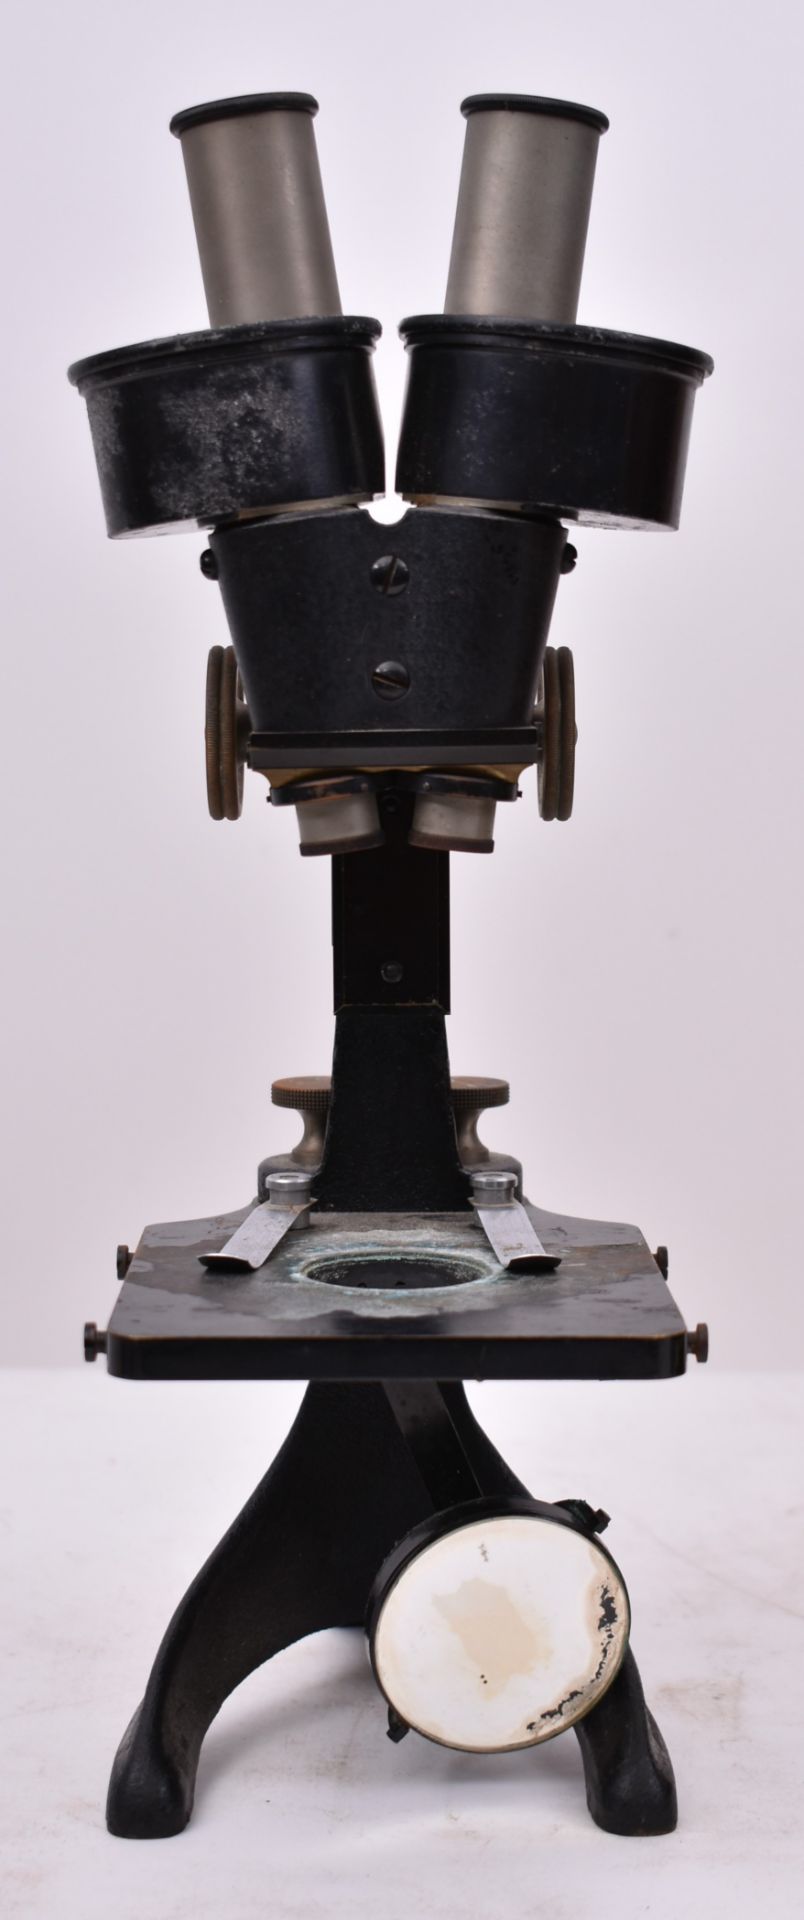 CARL ZEISS - EARLY 20TH CENTURY STEREO MICROSCOPE IN CASE - Image 2 of 10